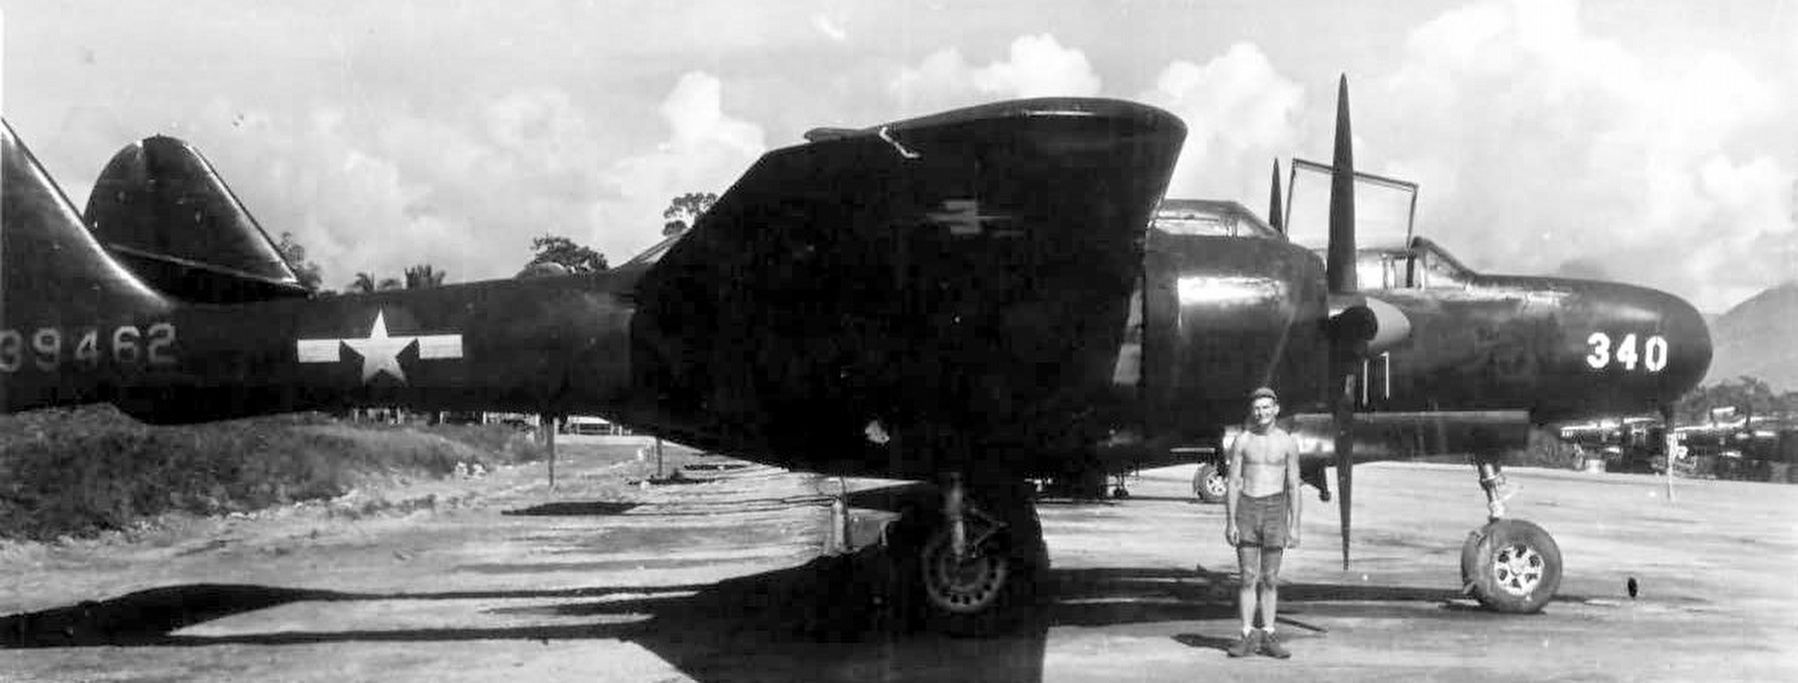 P-61B Black Widow image. Click for full size.